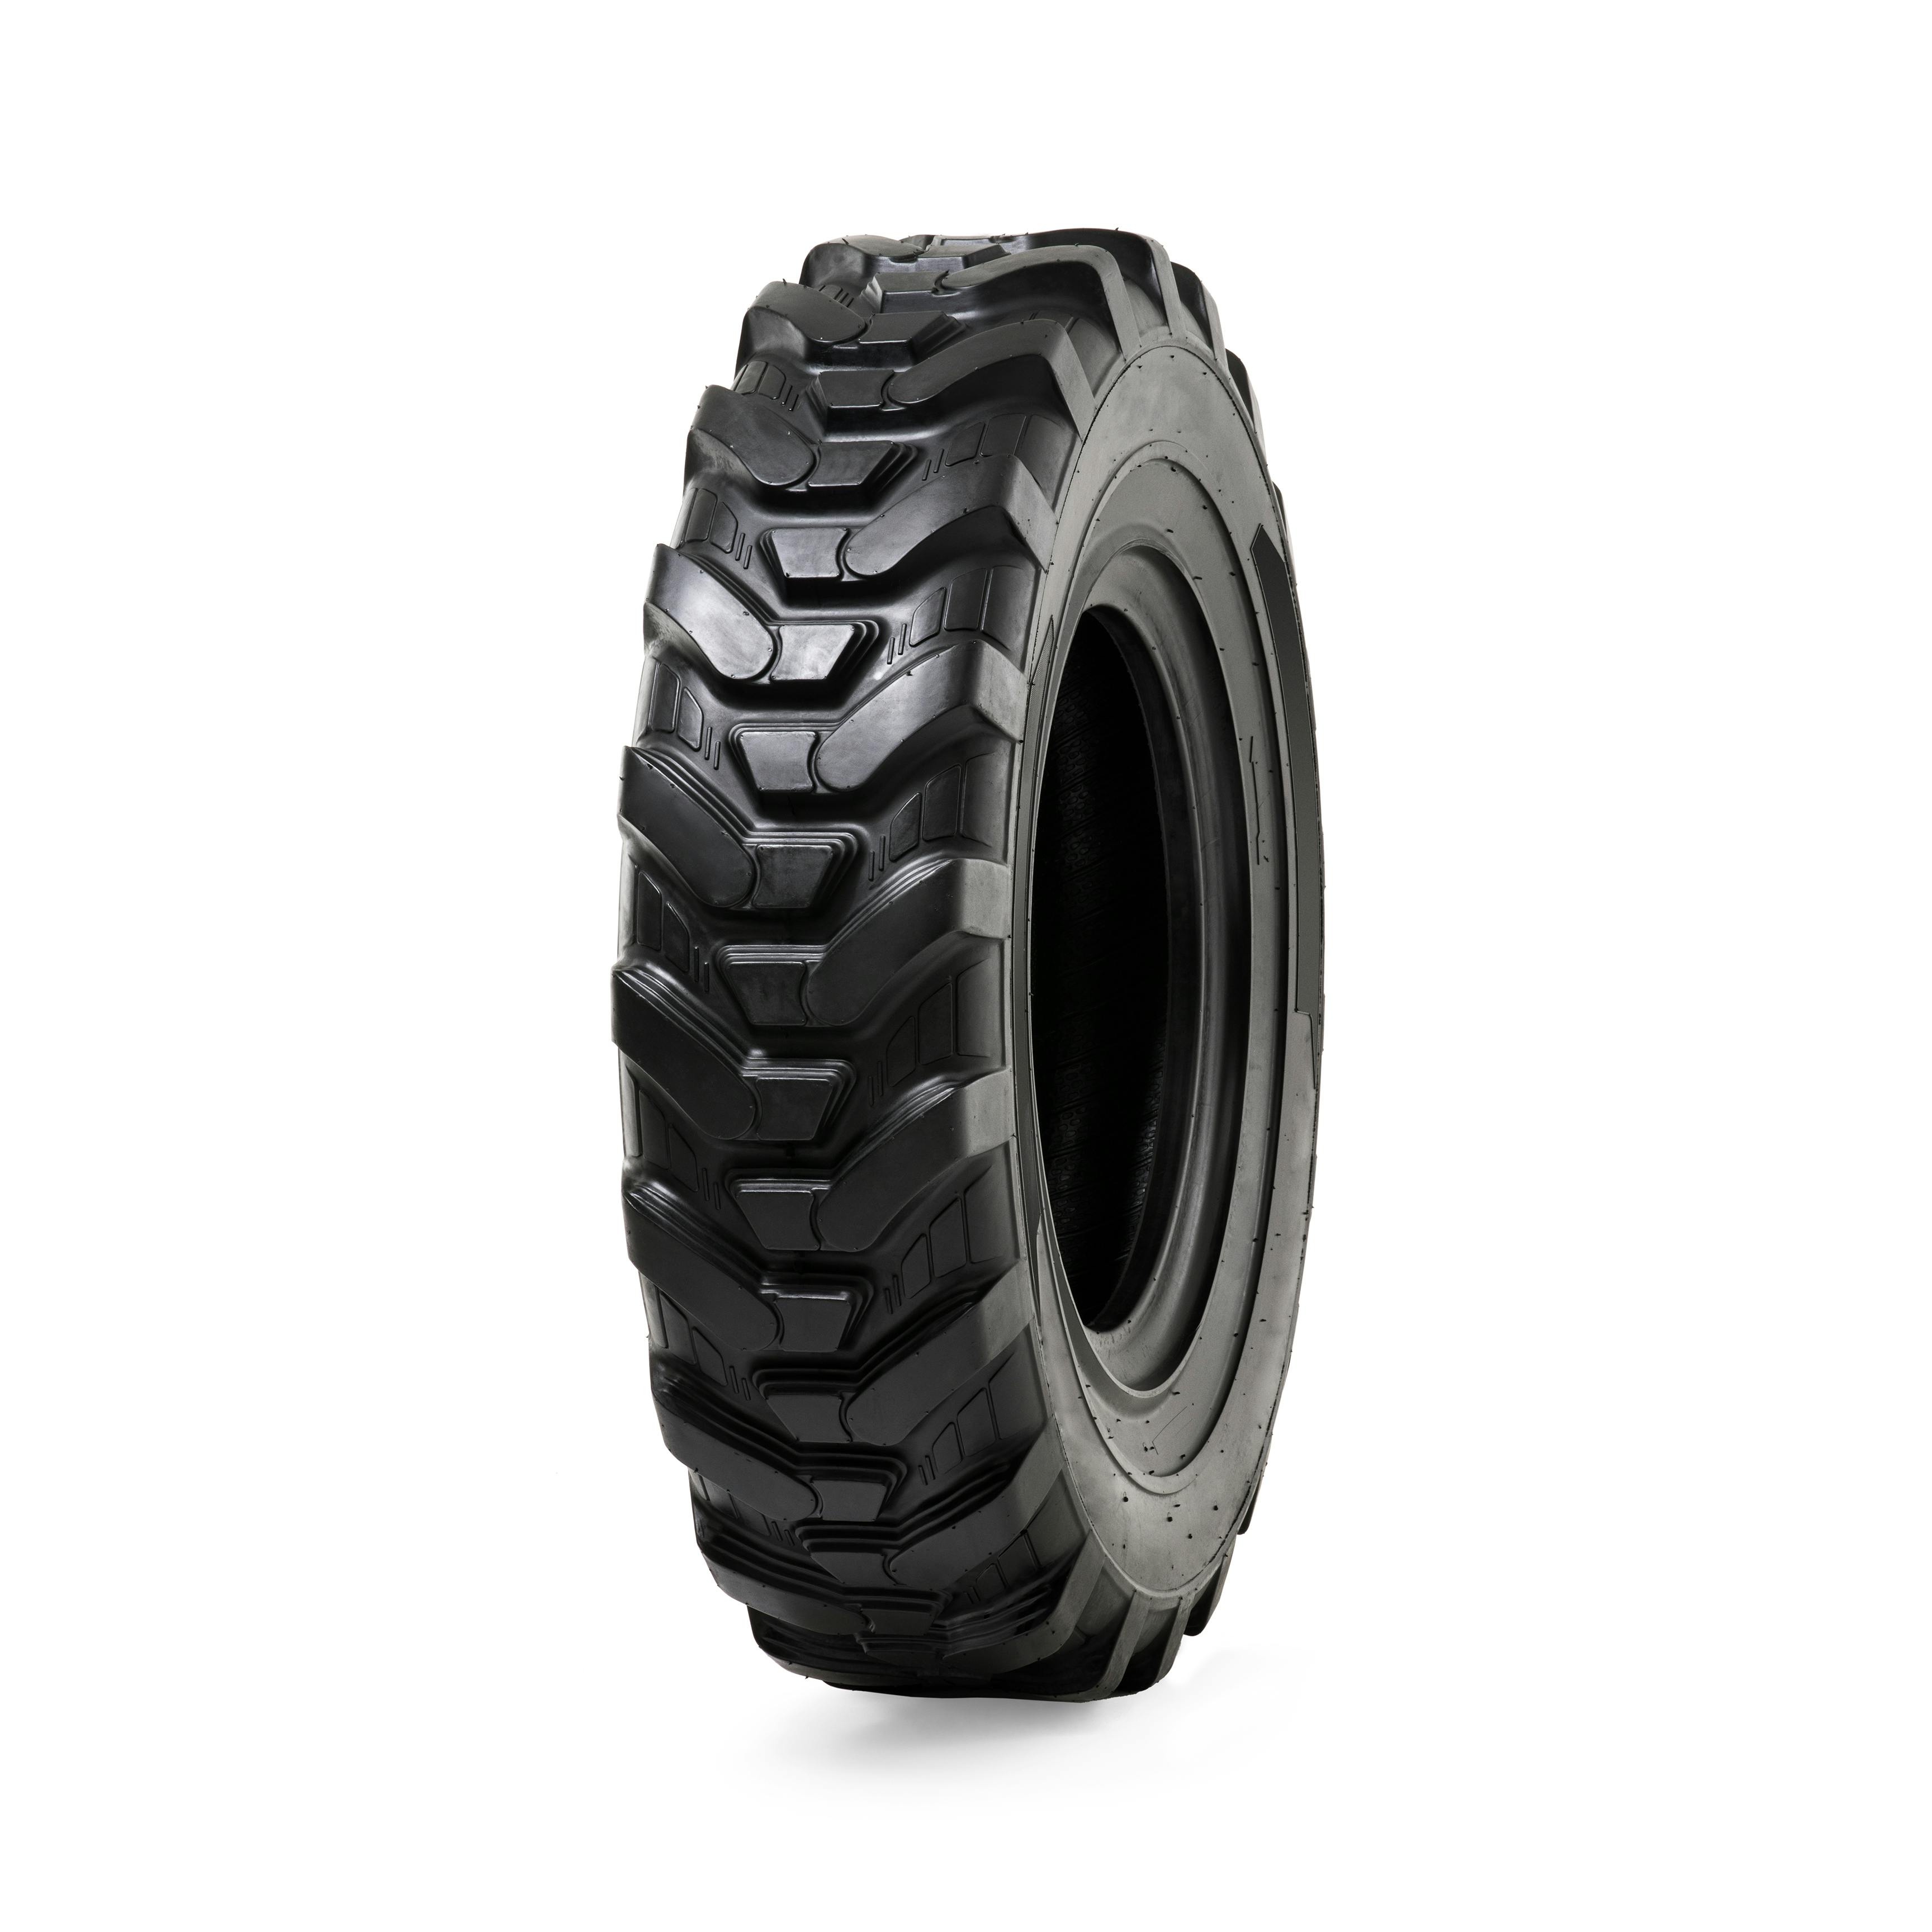 Camso Rolls Out Two New Tires for Telehandlers | Construction News